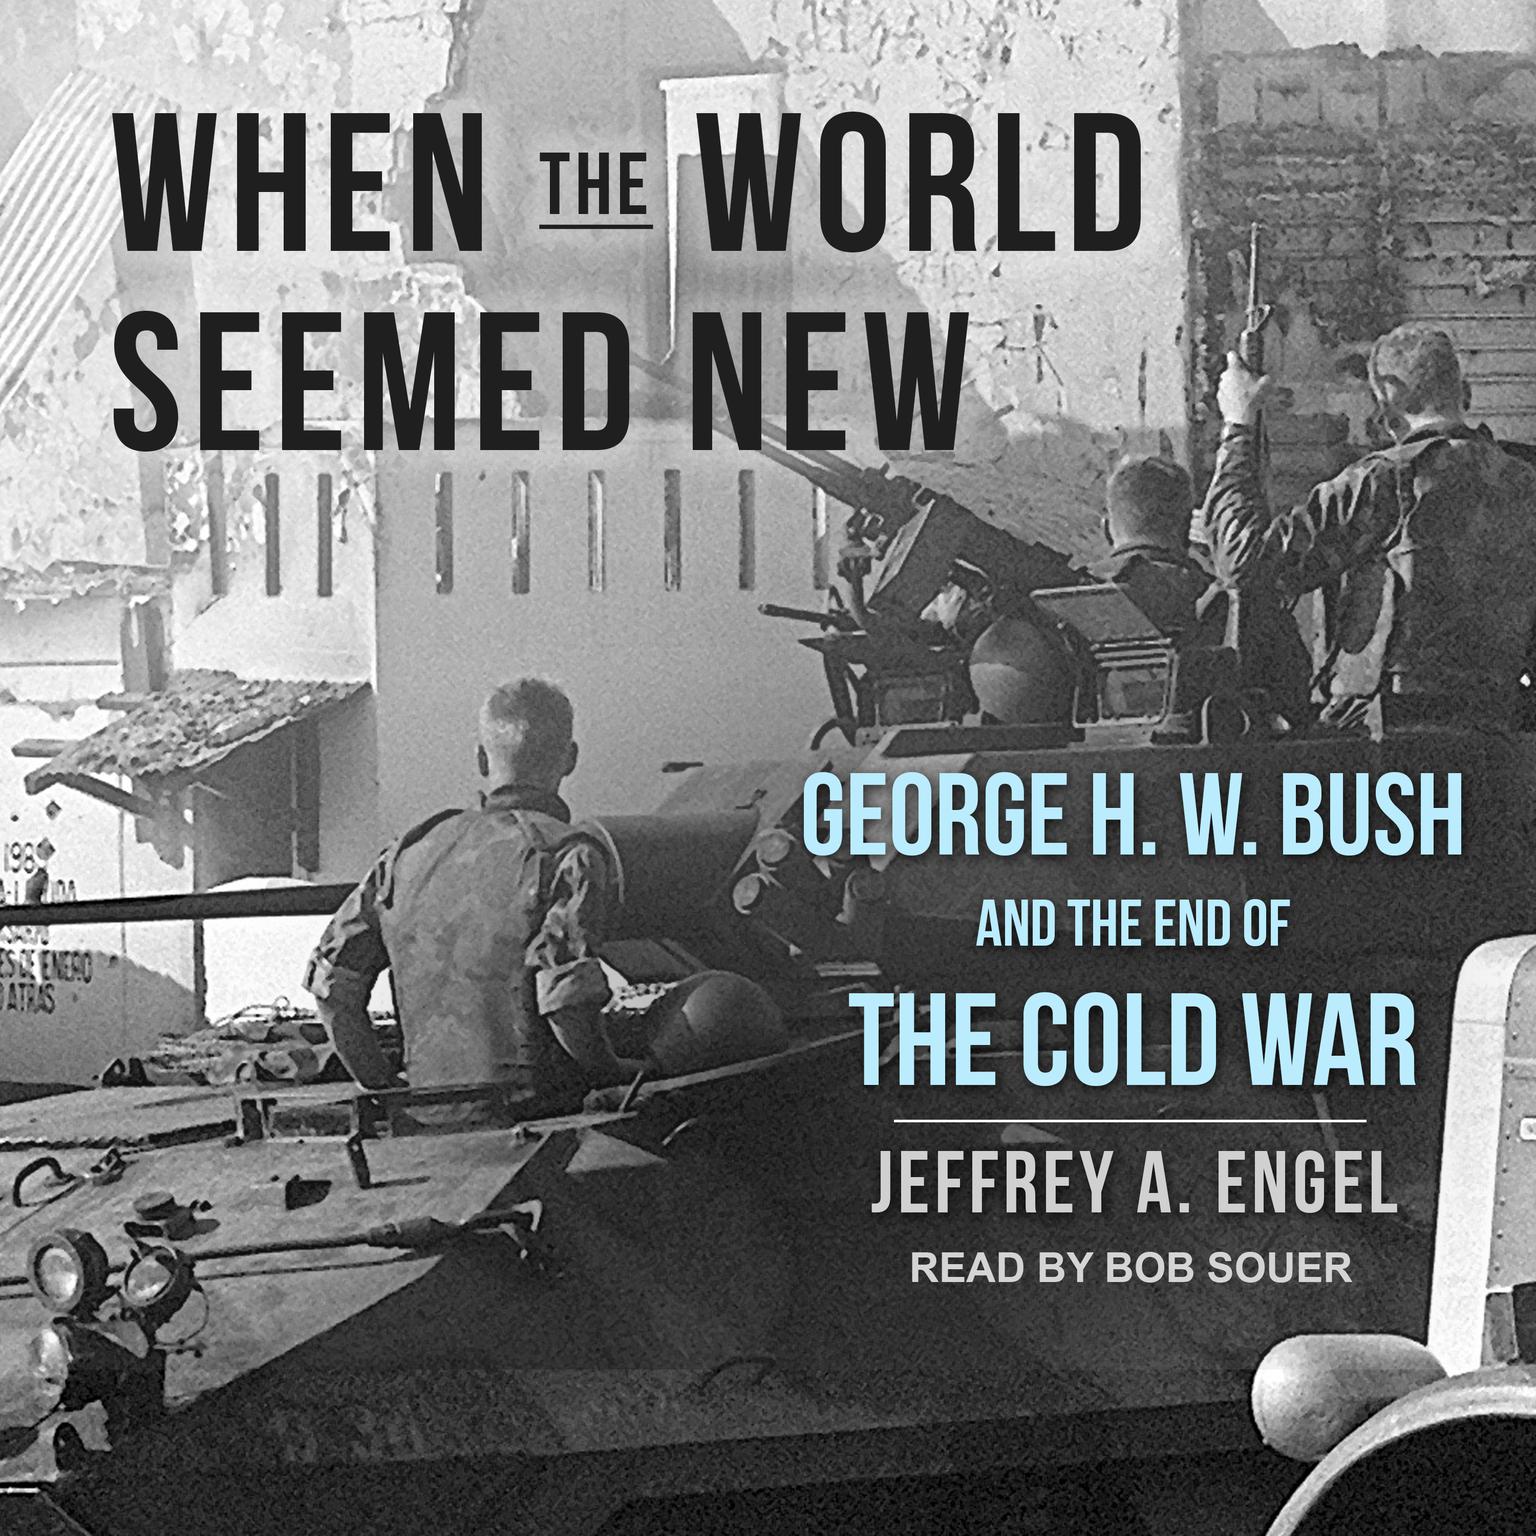 When the World Seemed New: George H. W. Bush and the End of the Cold War Audiobook, by Jeffrey A. Engel